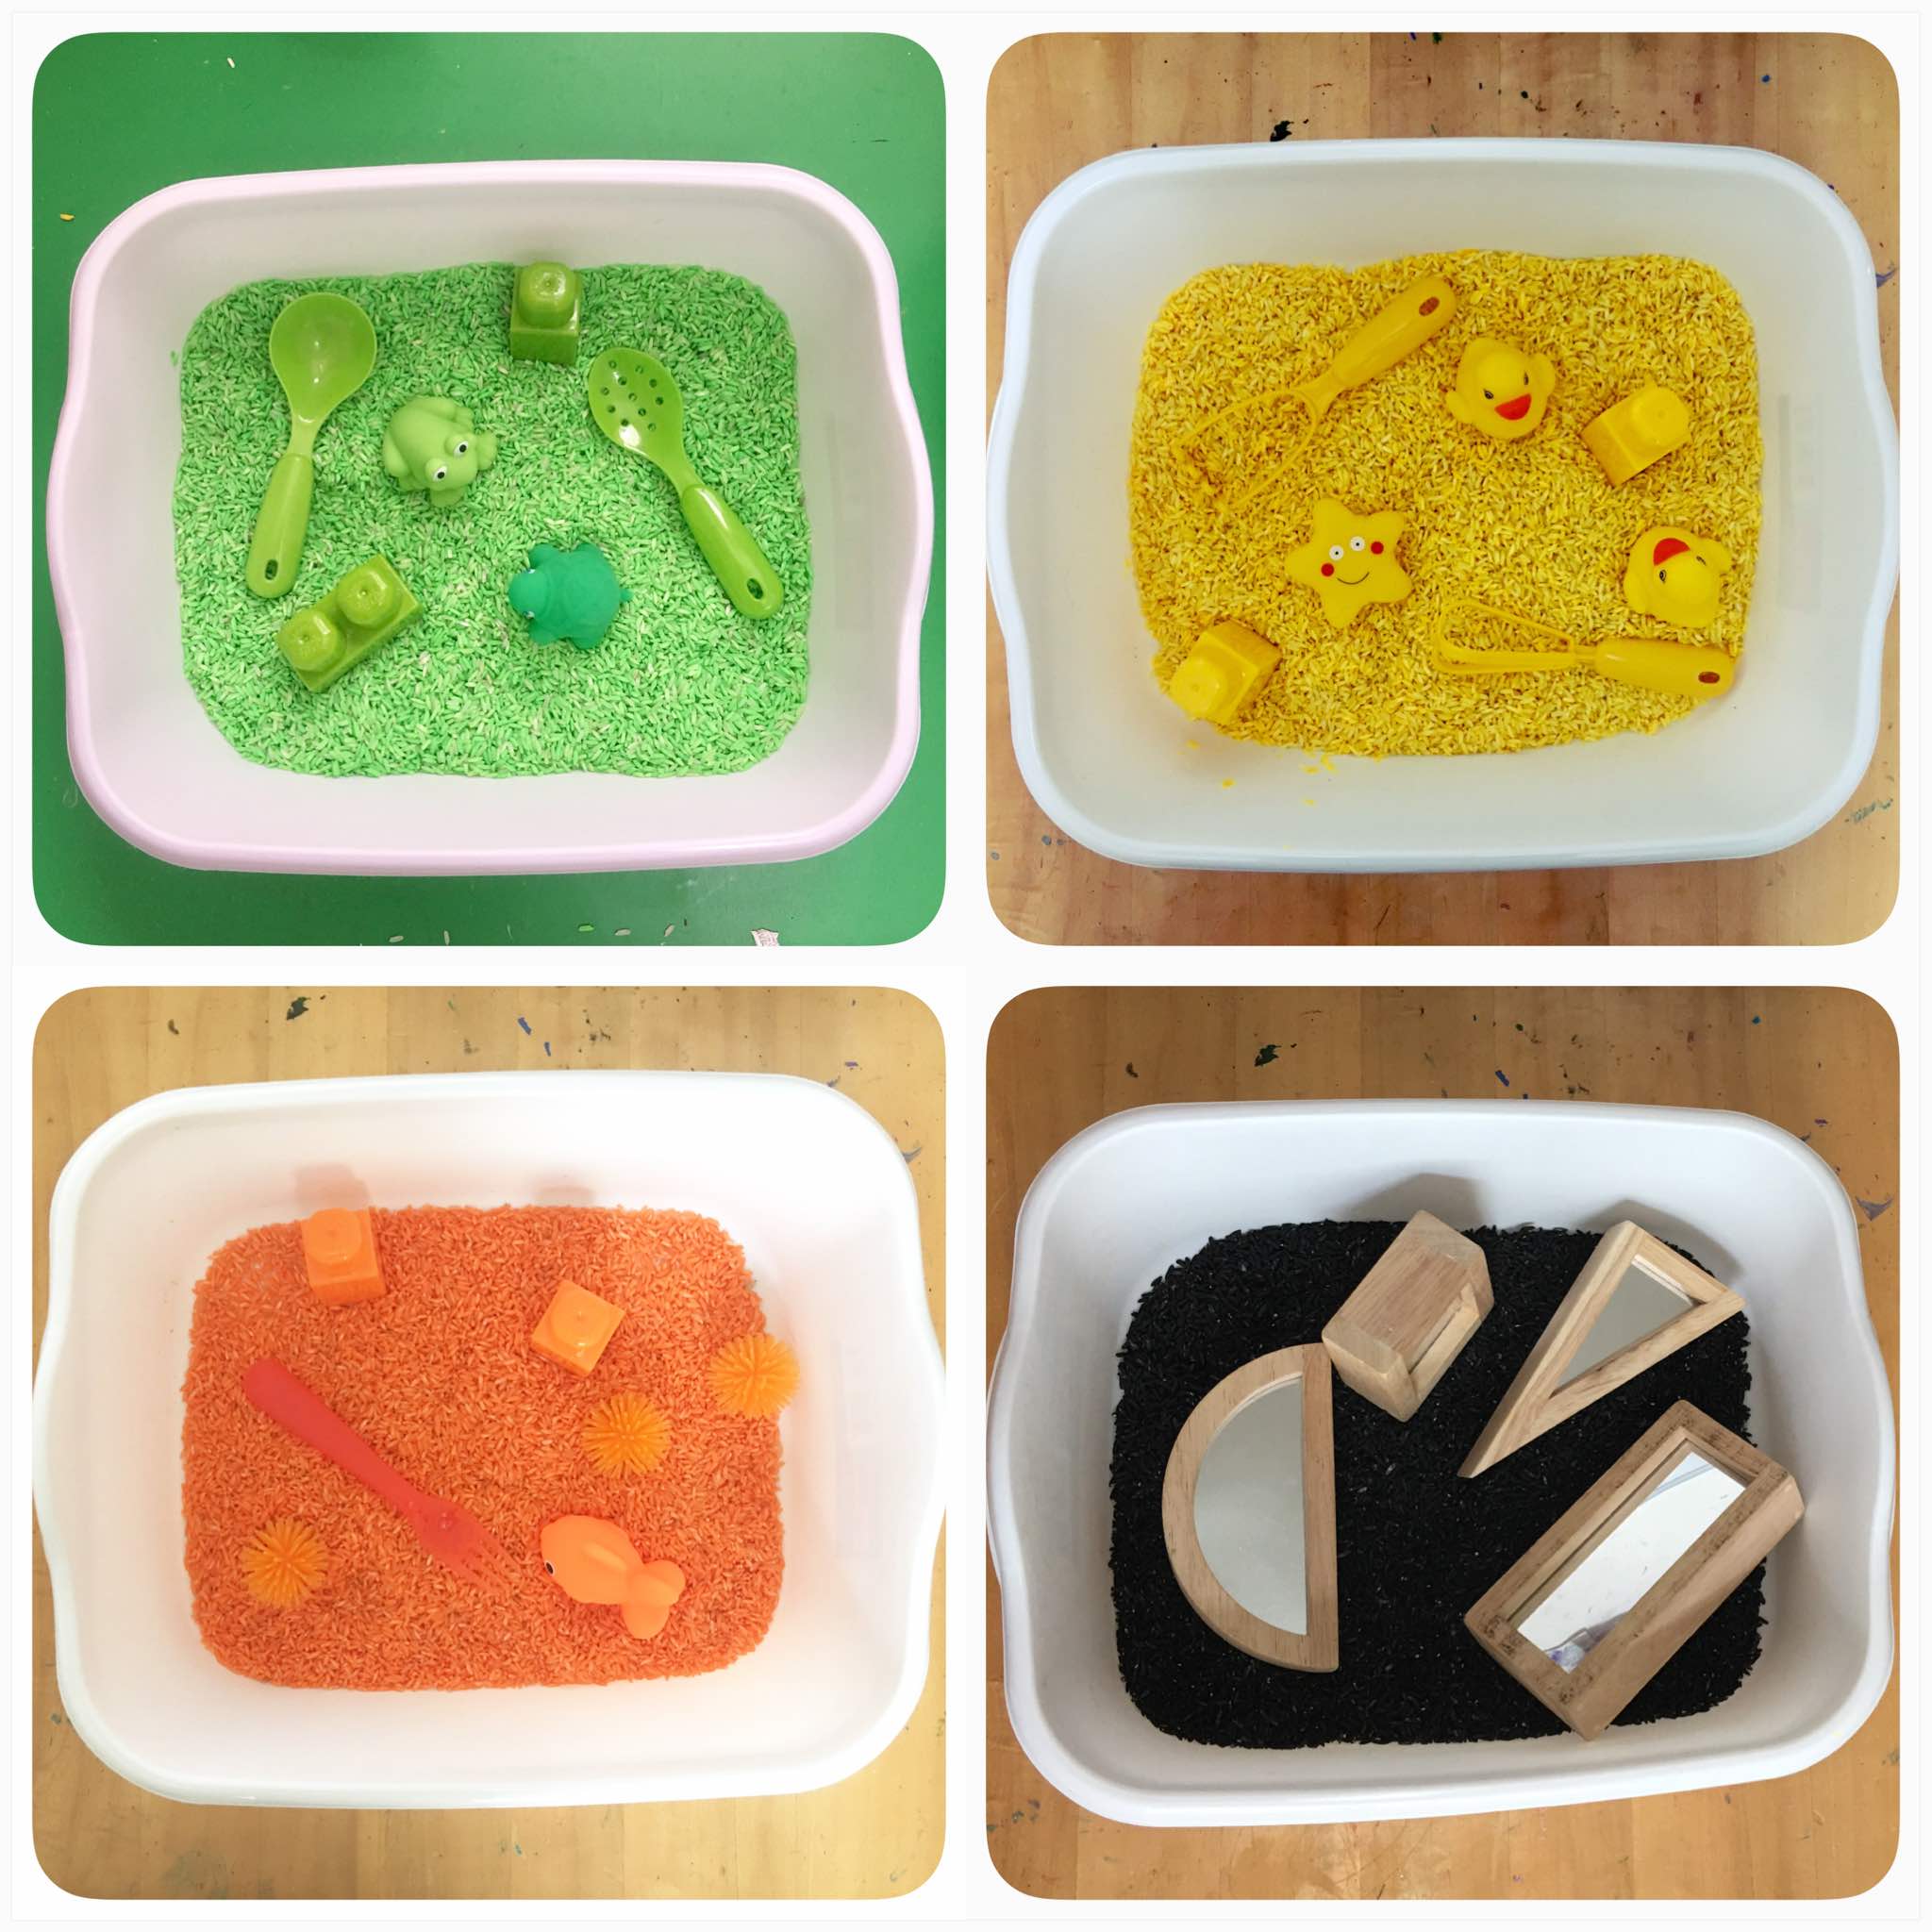 Toddler Sensory Bin - Amazing how much play kids can get out of such simple sensory materials. Acrylic paints to dye the rice .